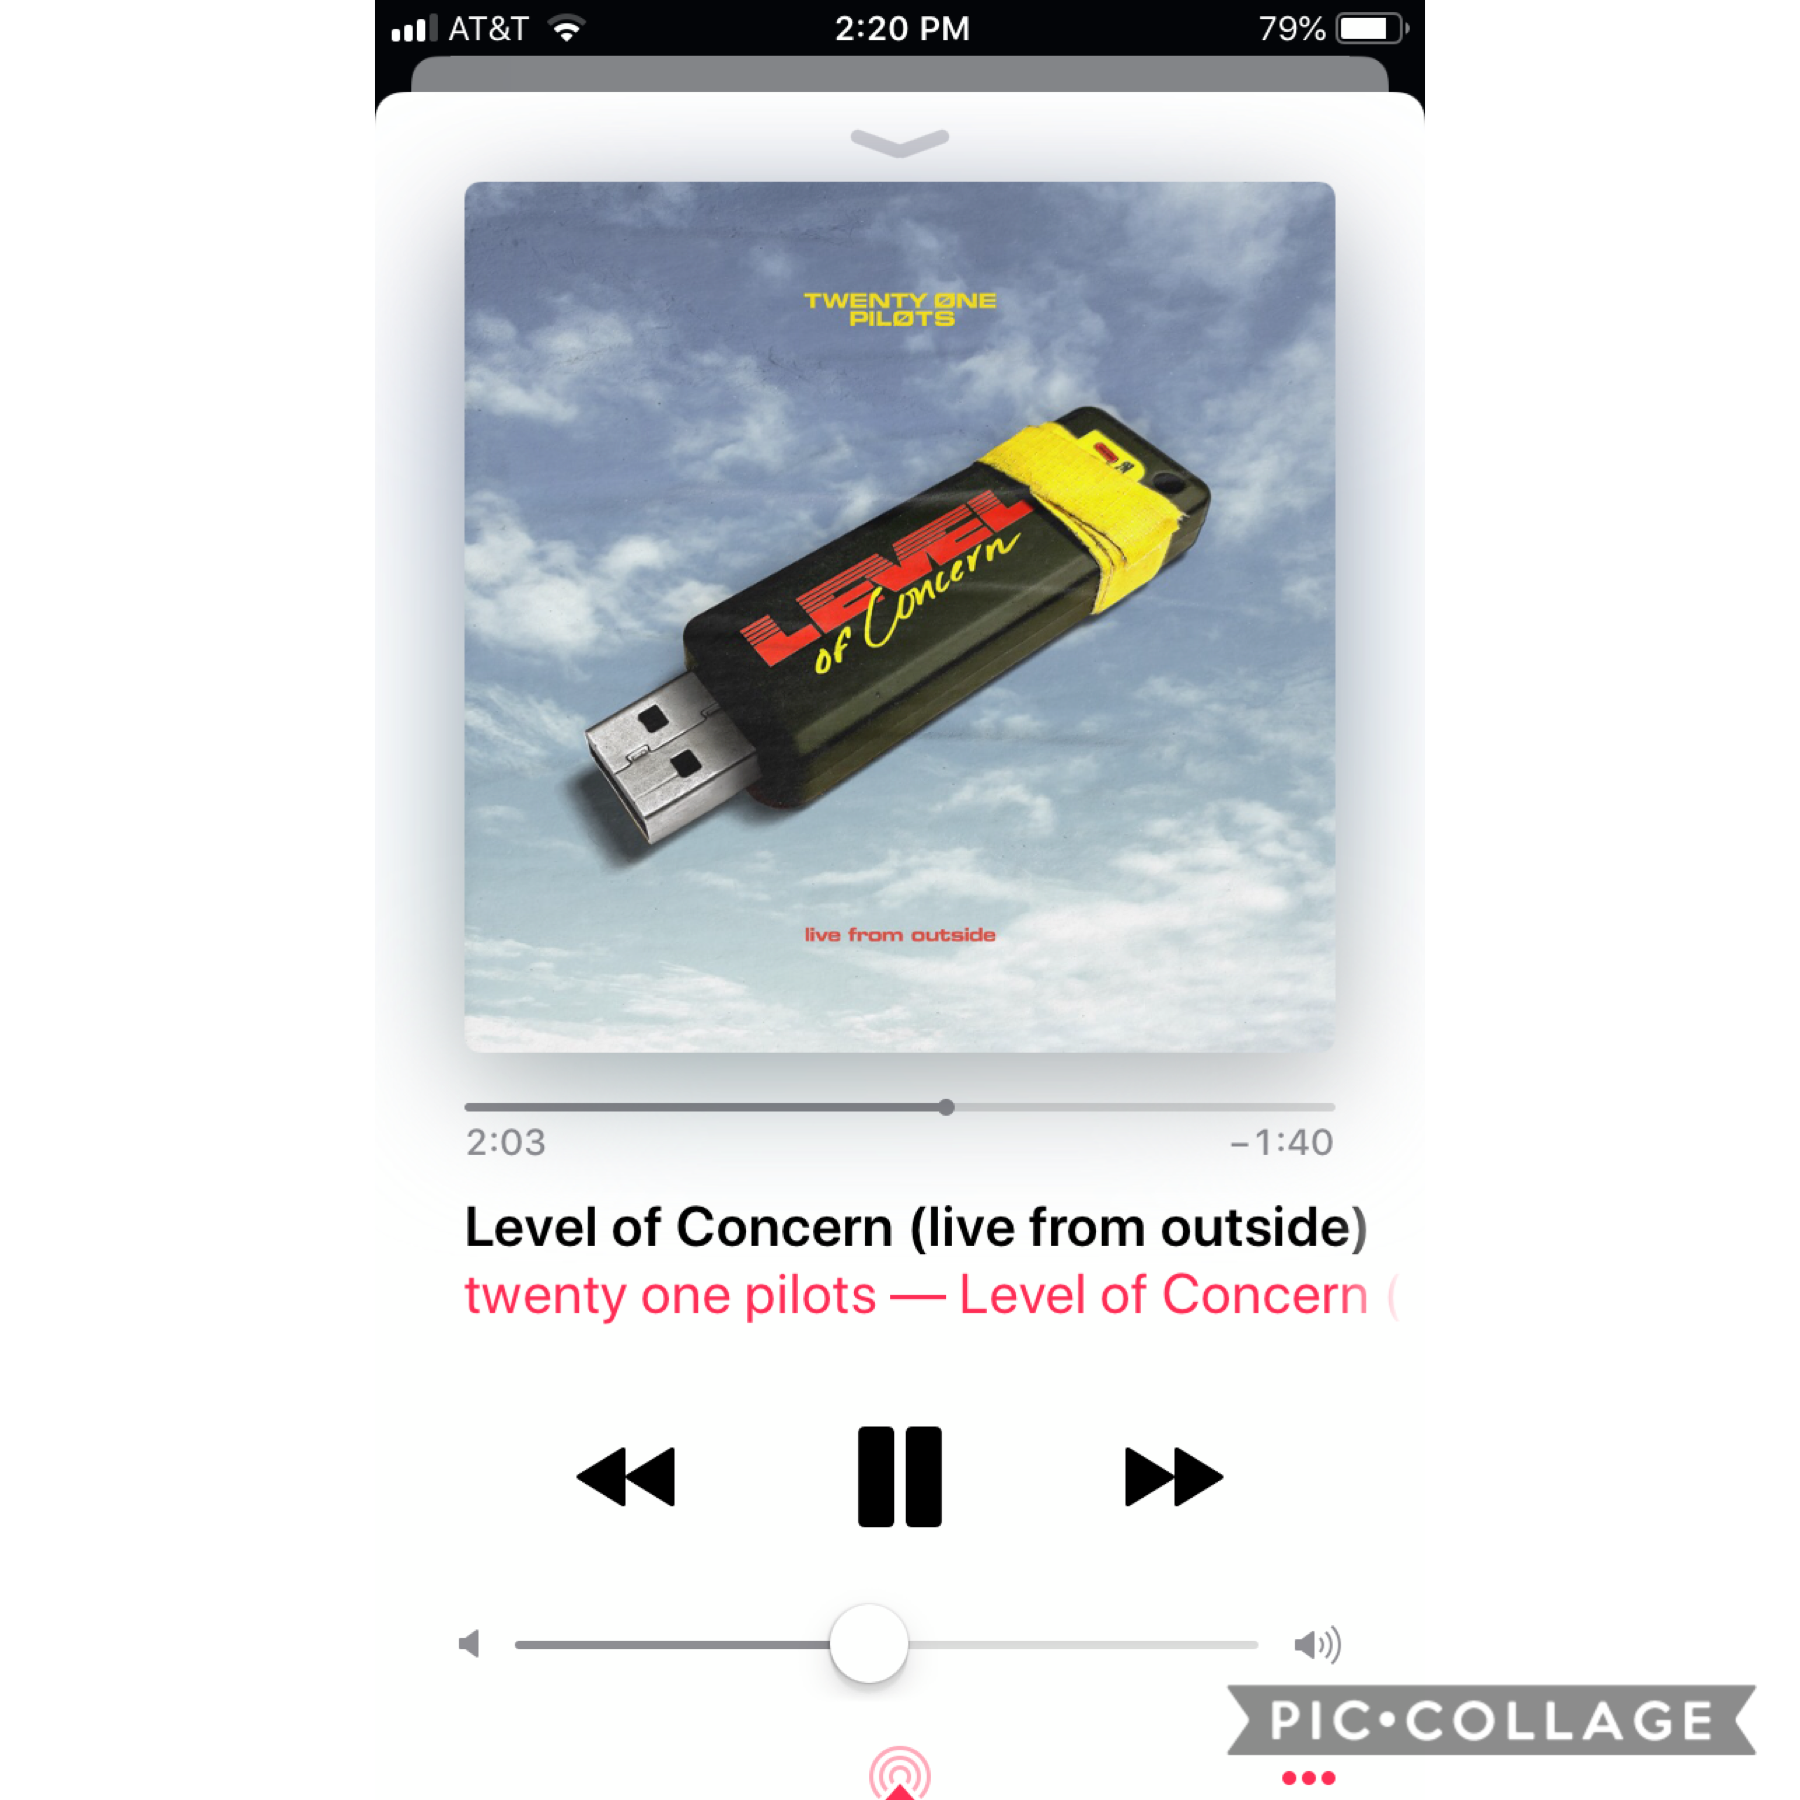 hi tøp is still my favorite band after all these years ahaha i can’t stop listening omg this version of level of concern is such a bopppp (also tøp is the reason i met literally all of you so 🥺😂)